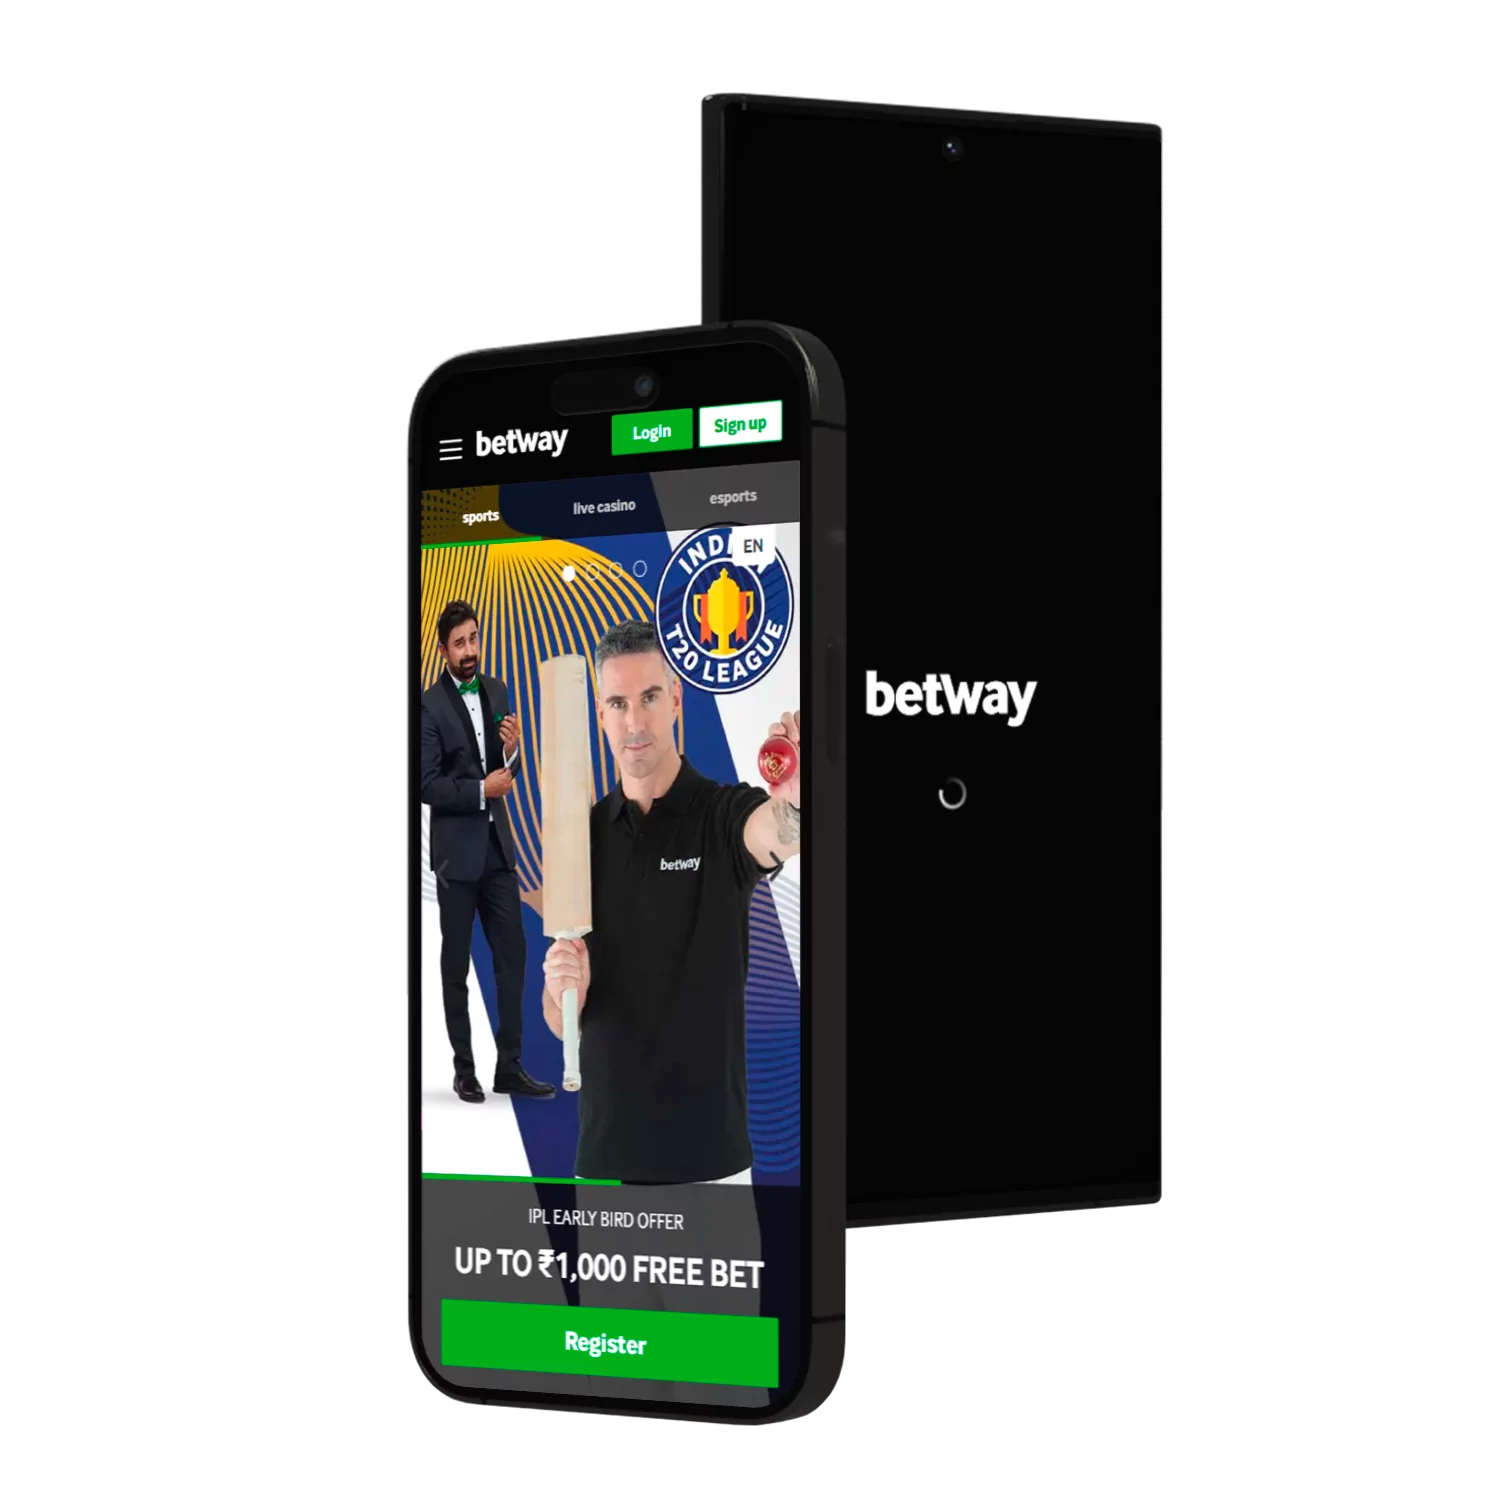 You can place bets and win real money in the Betway app.